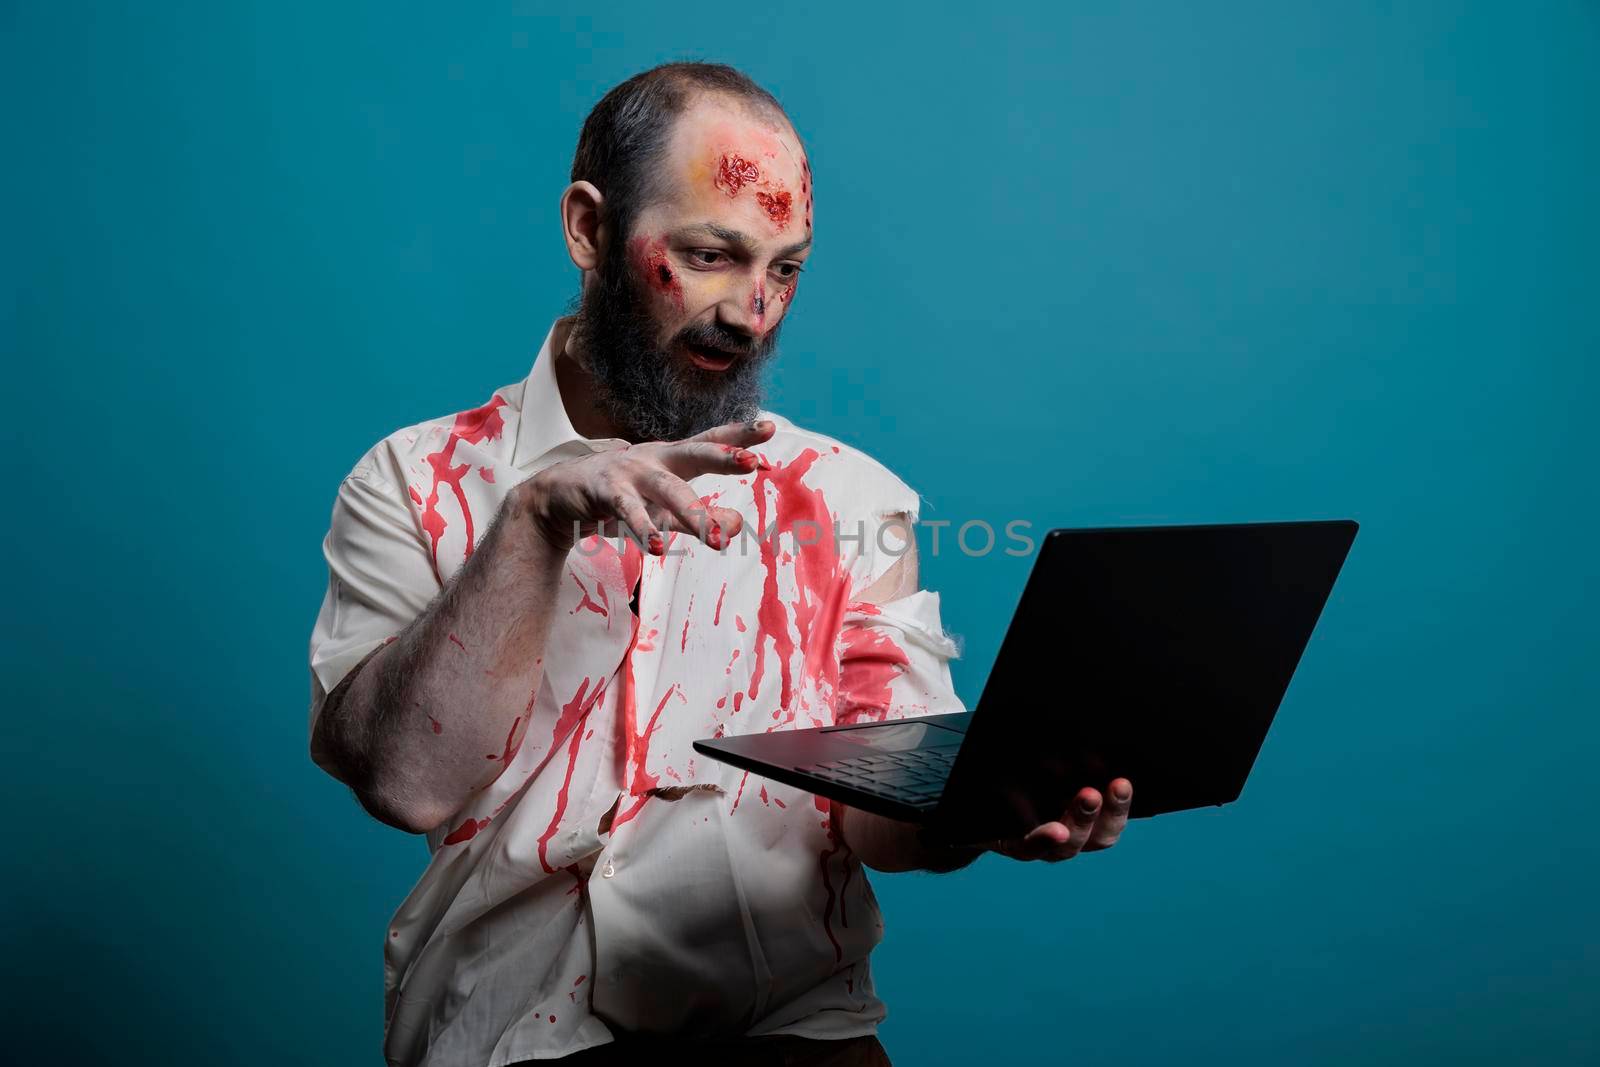 Halloween zombie using laptop computer in studio, looking creepy and dangerous browsing internet while being spooky and apocalyptic. Brain eating corpse with bloody scars using social media on pc.